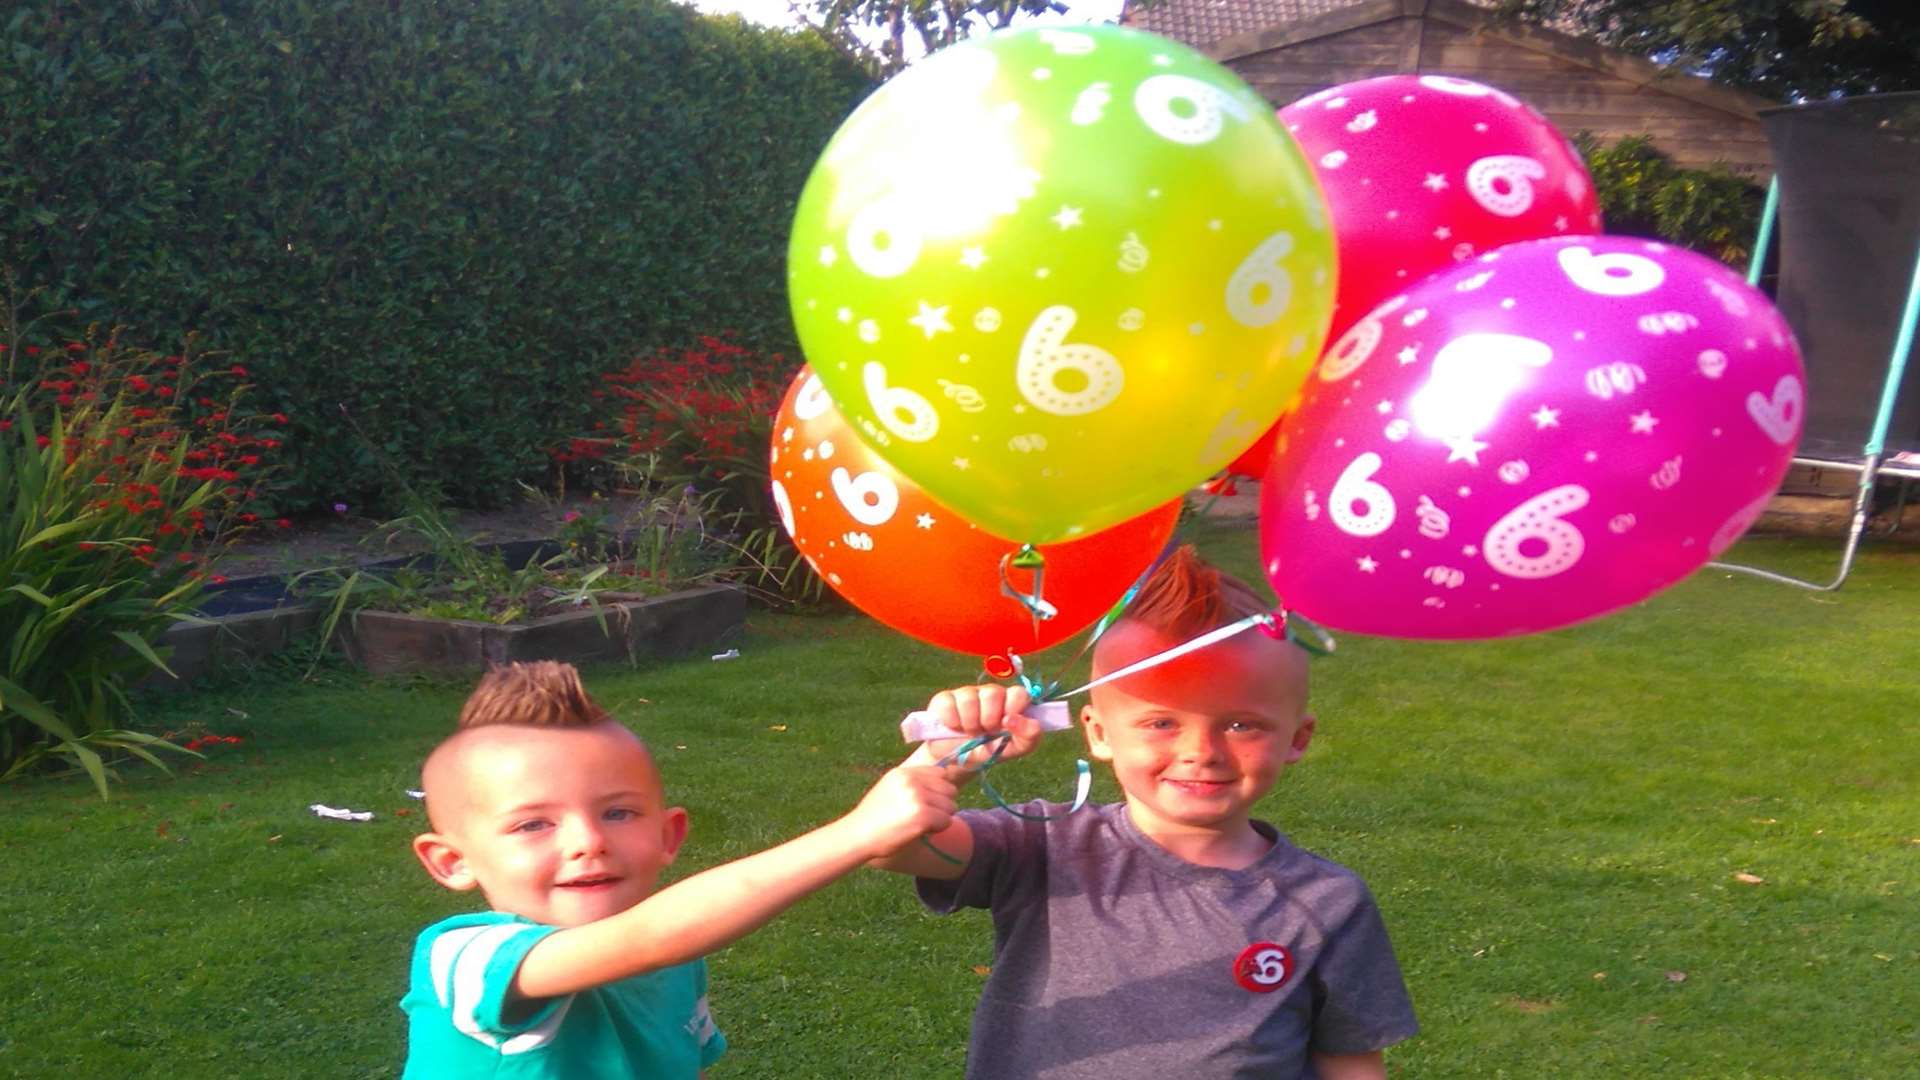 Connor and Danny letting off the balloons in their back garden